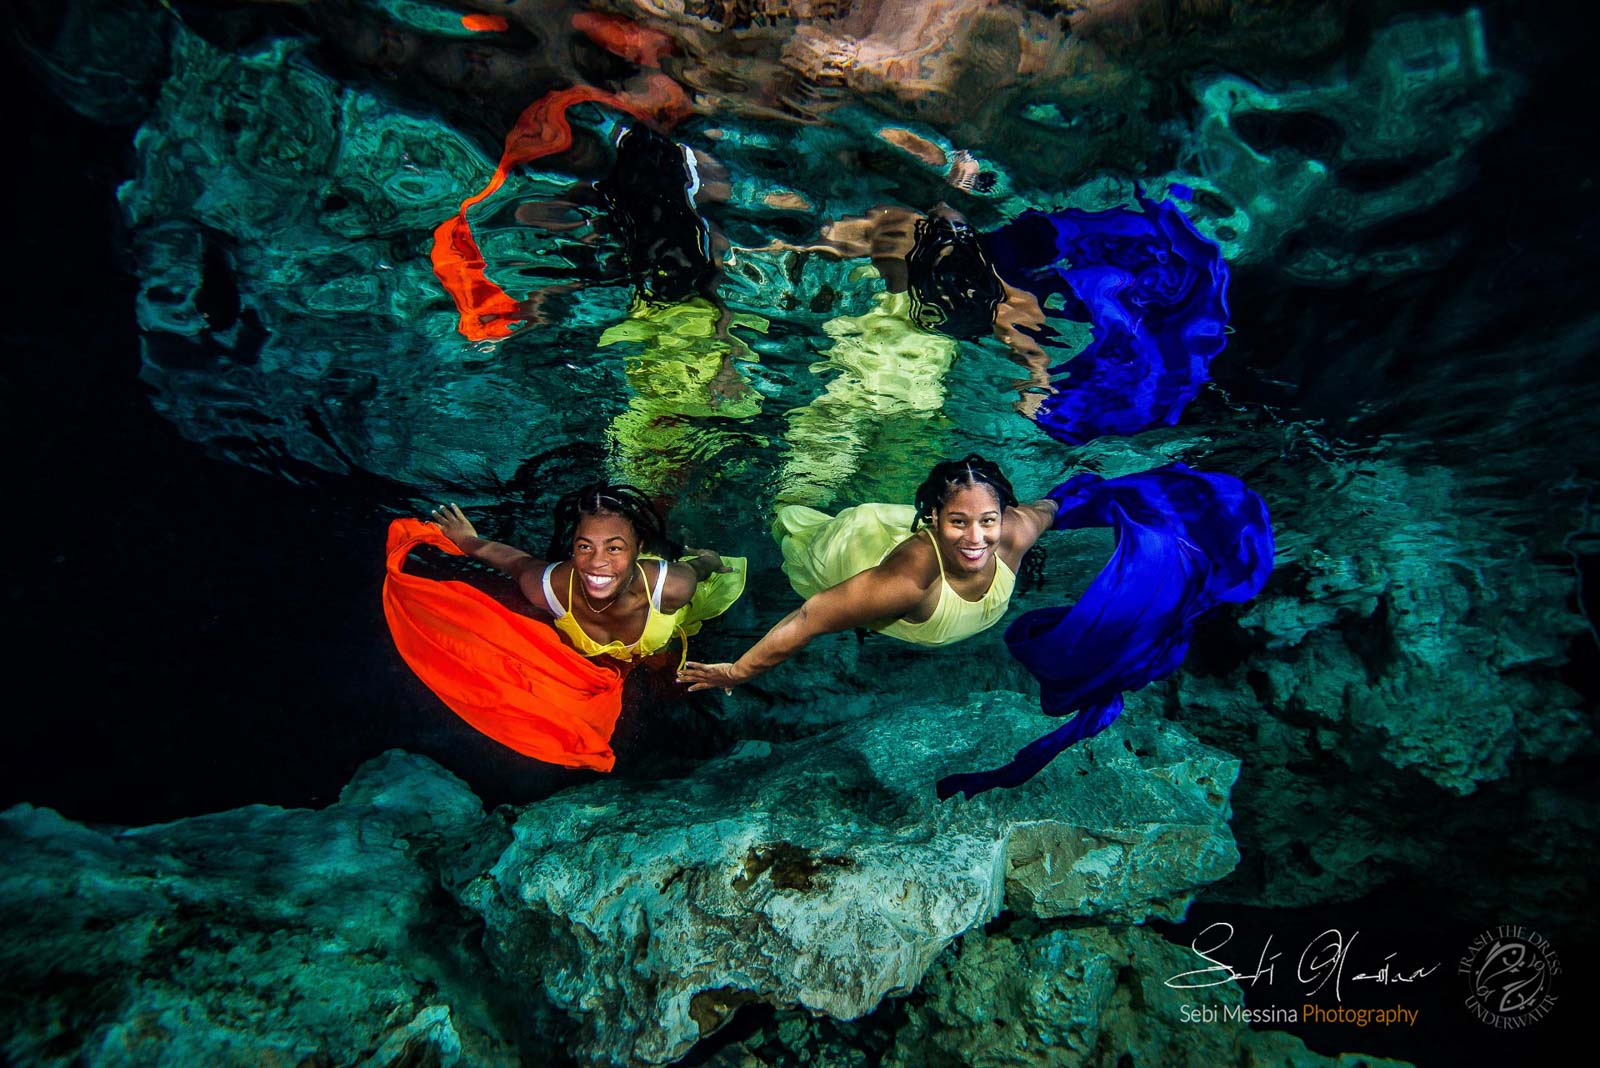 Mother and Daughter Underwater Photoshoot Mexico – Sebi Messina Photography